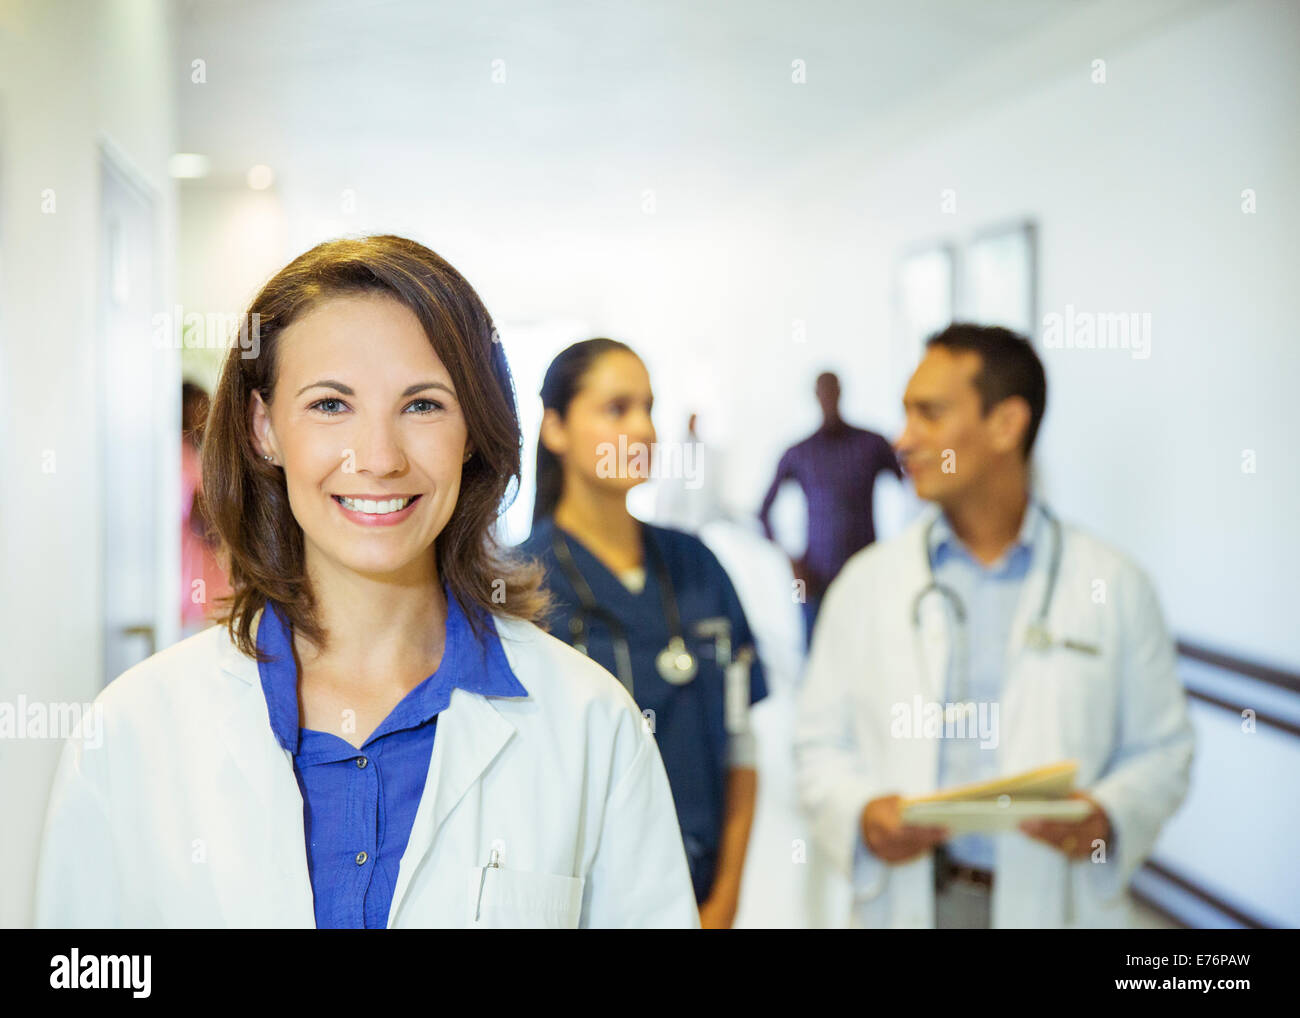 Doctor smiling in hospital hallway Stock Photo